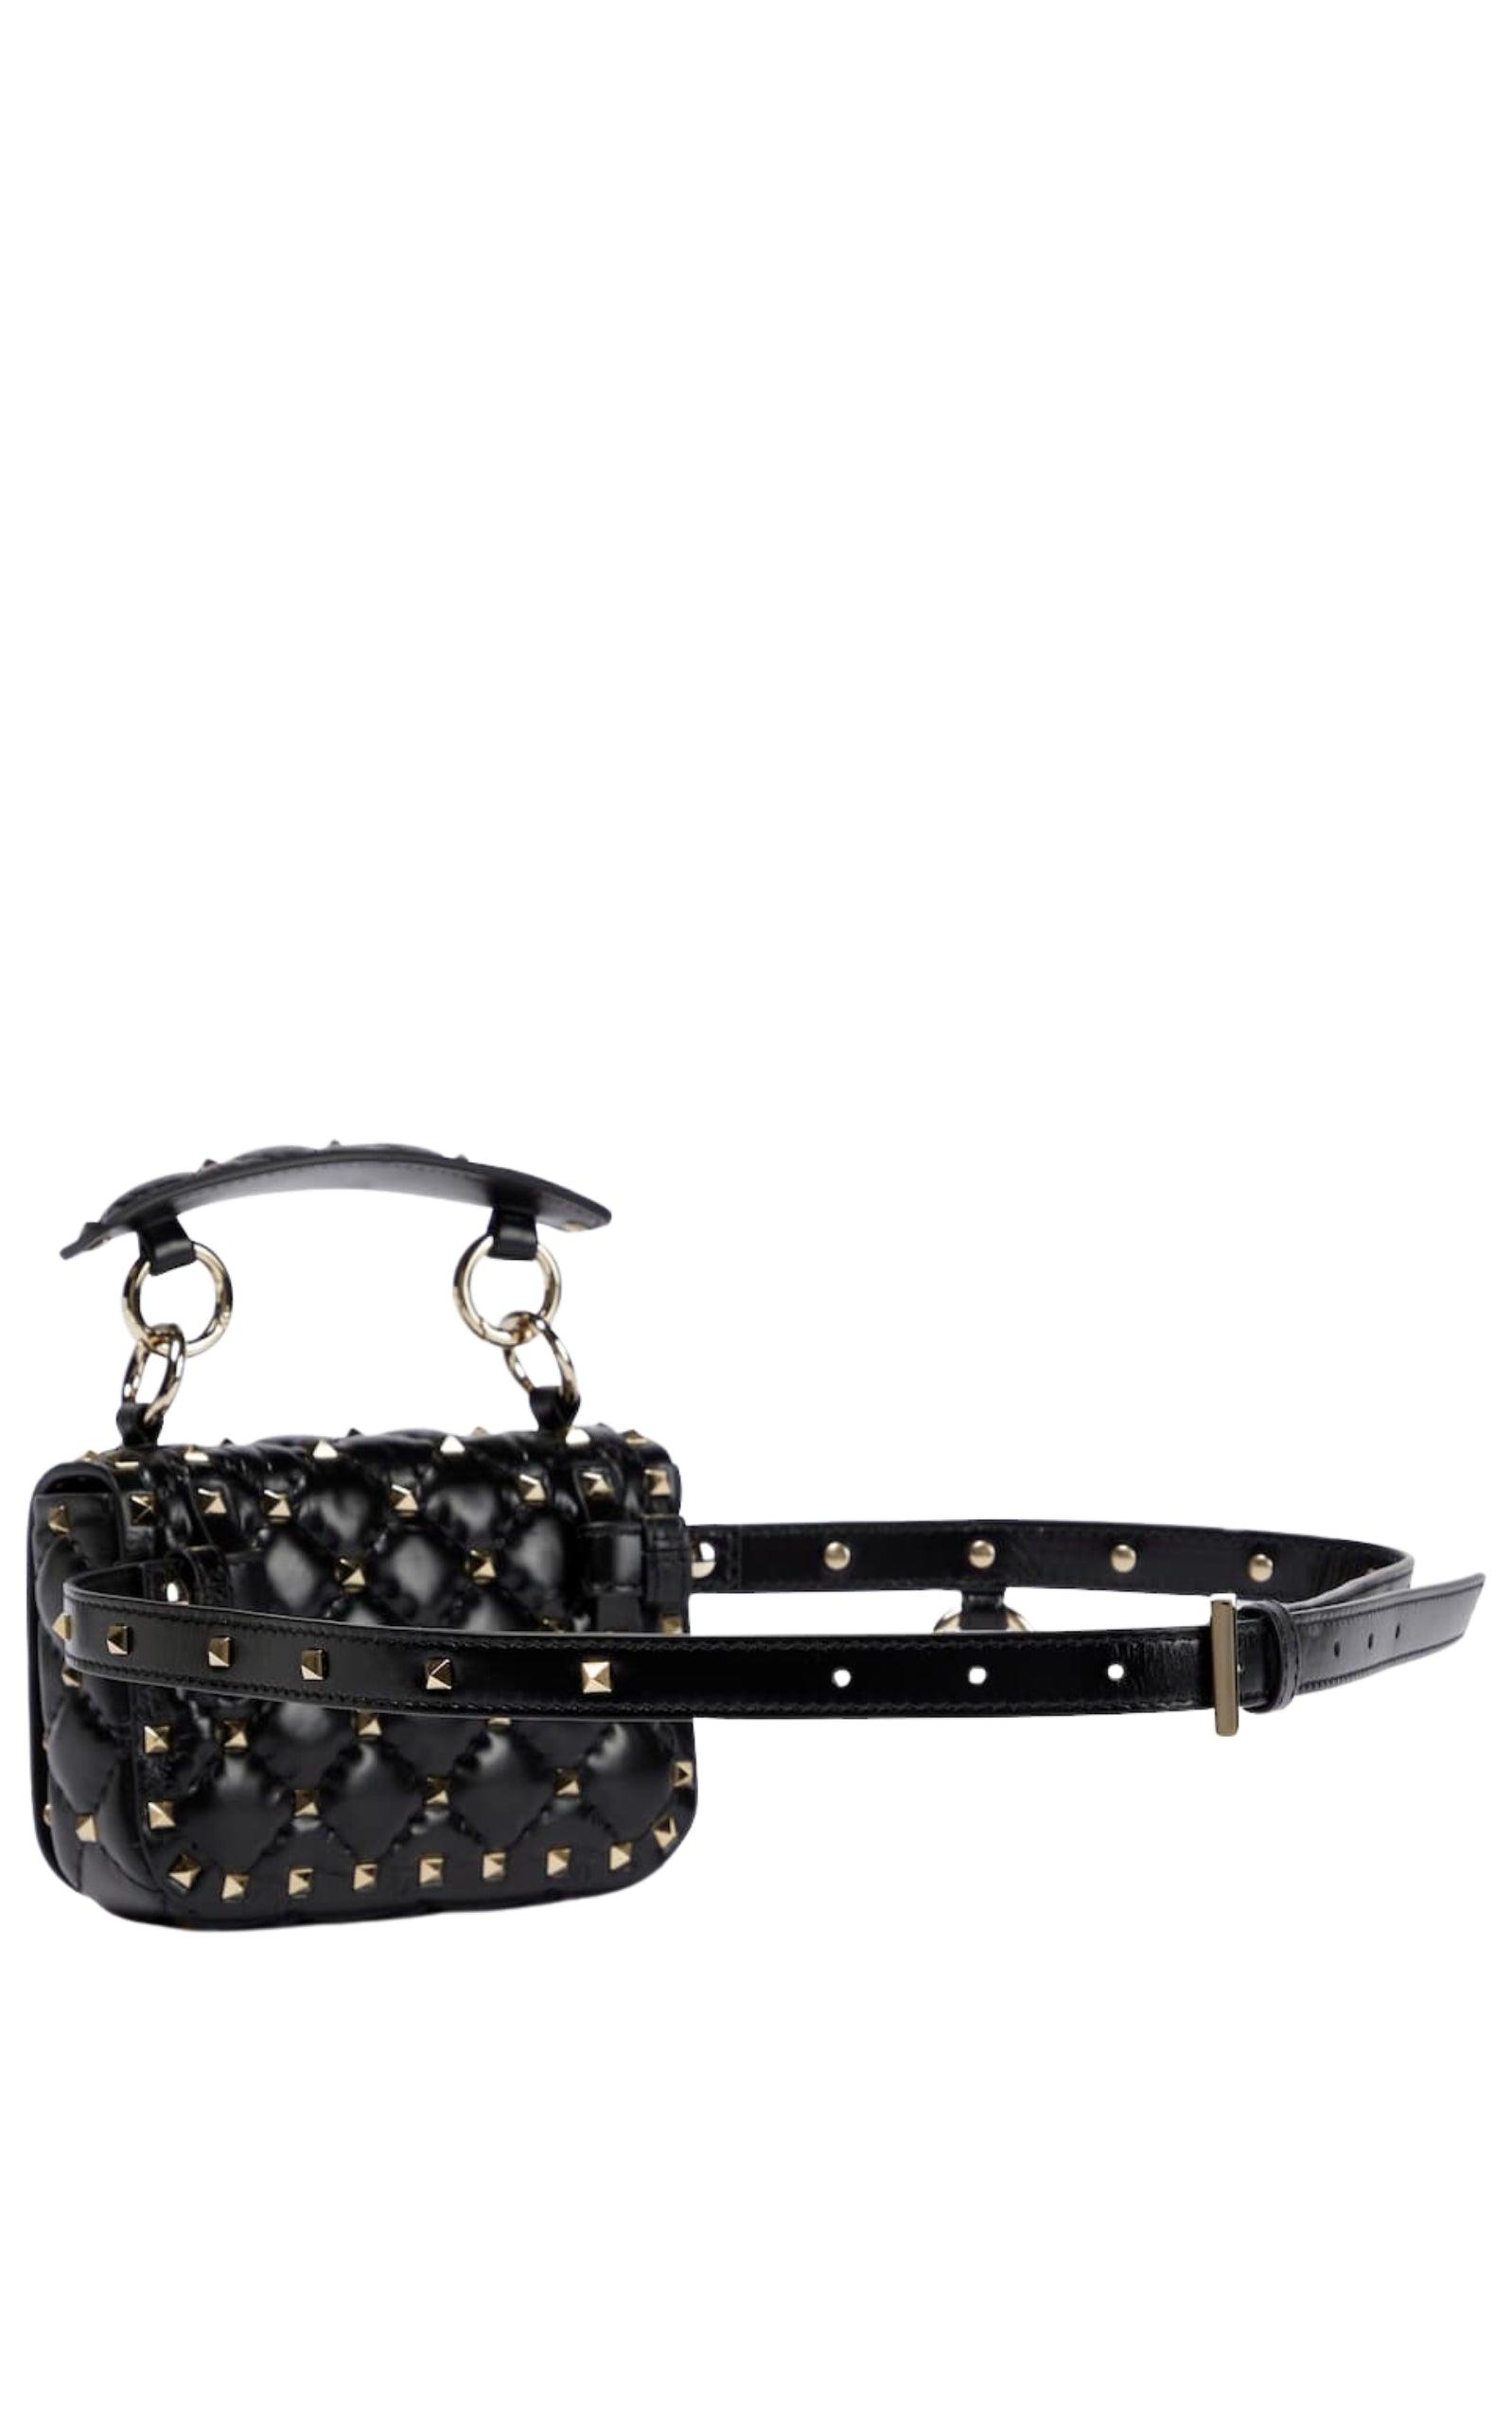 Rockstud Spike Small Leather Shoulder Bag in White - Valentino